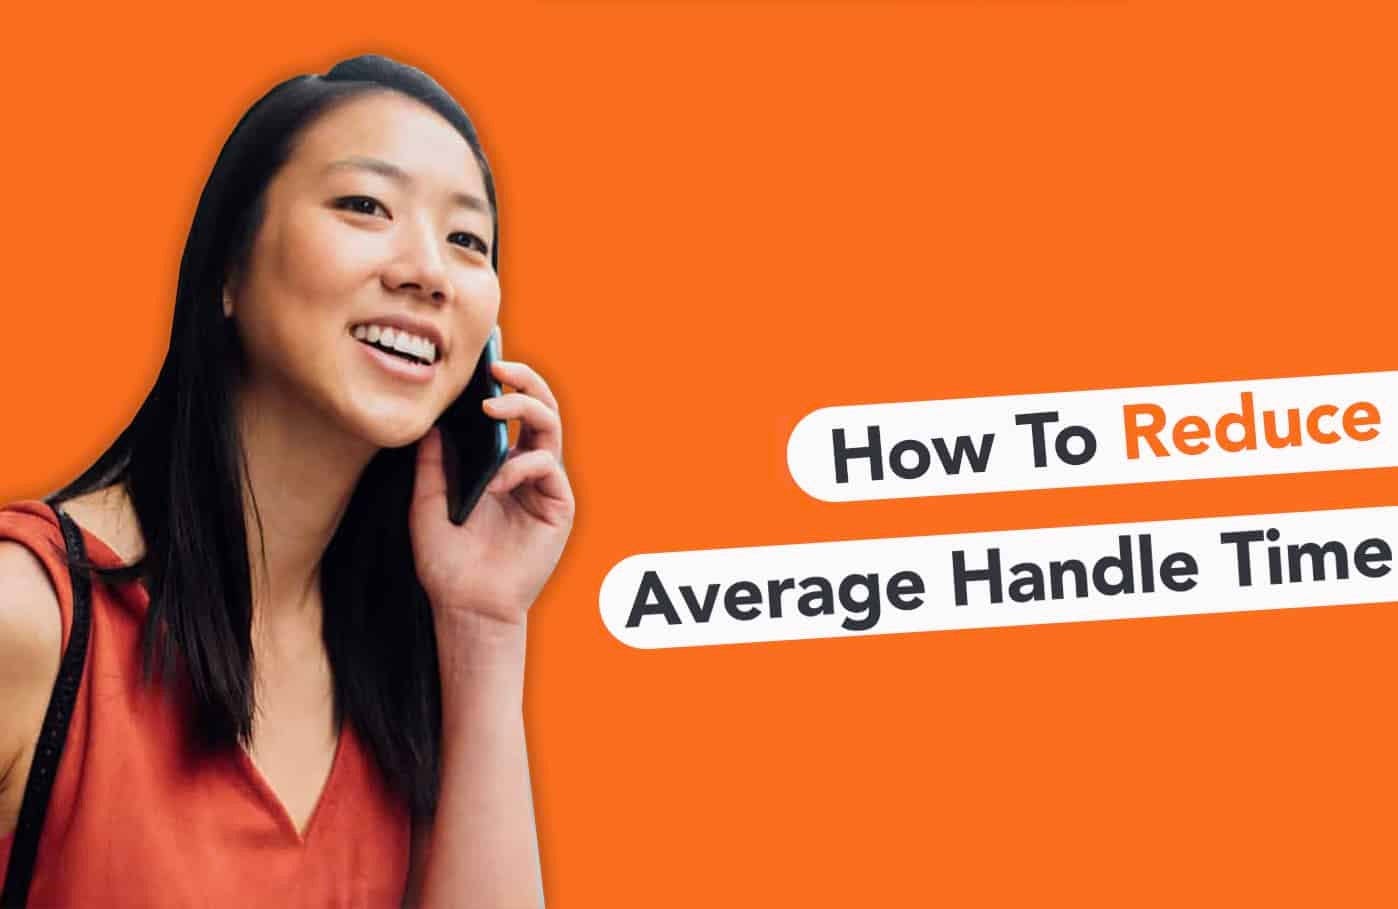 How to reduce average handle time